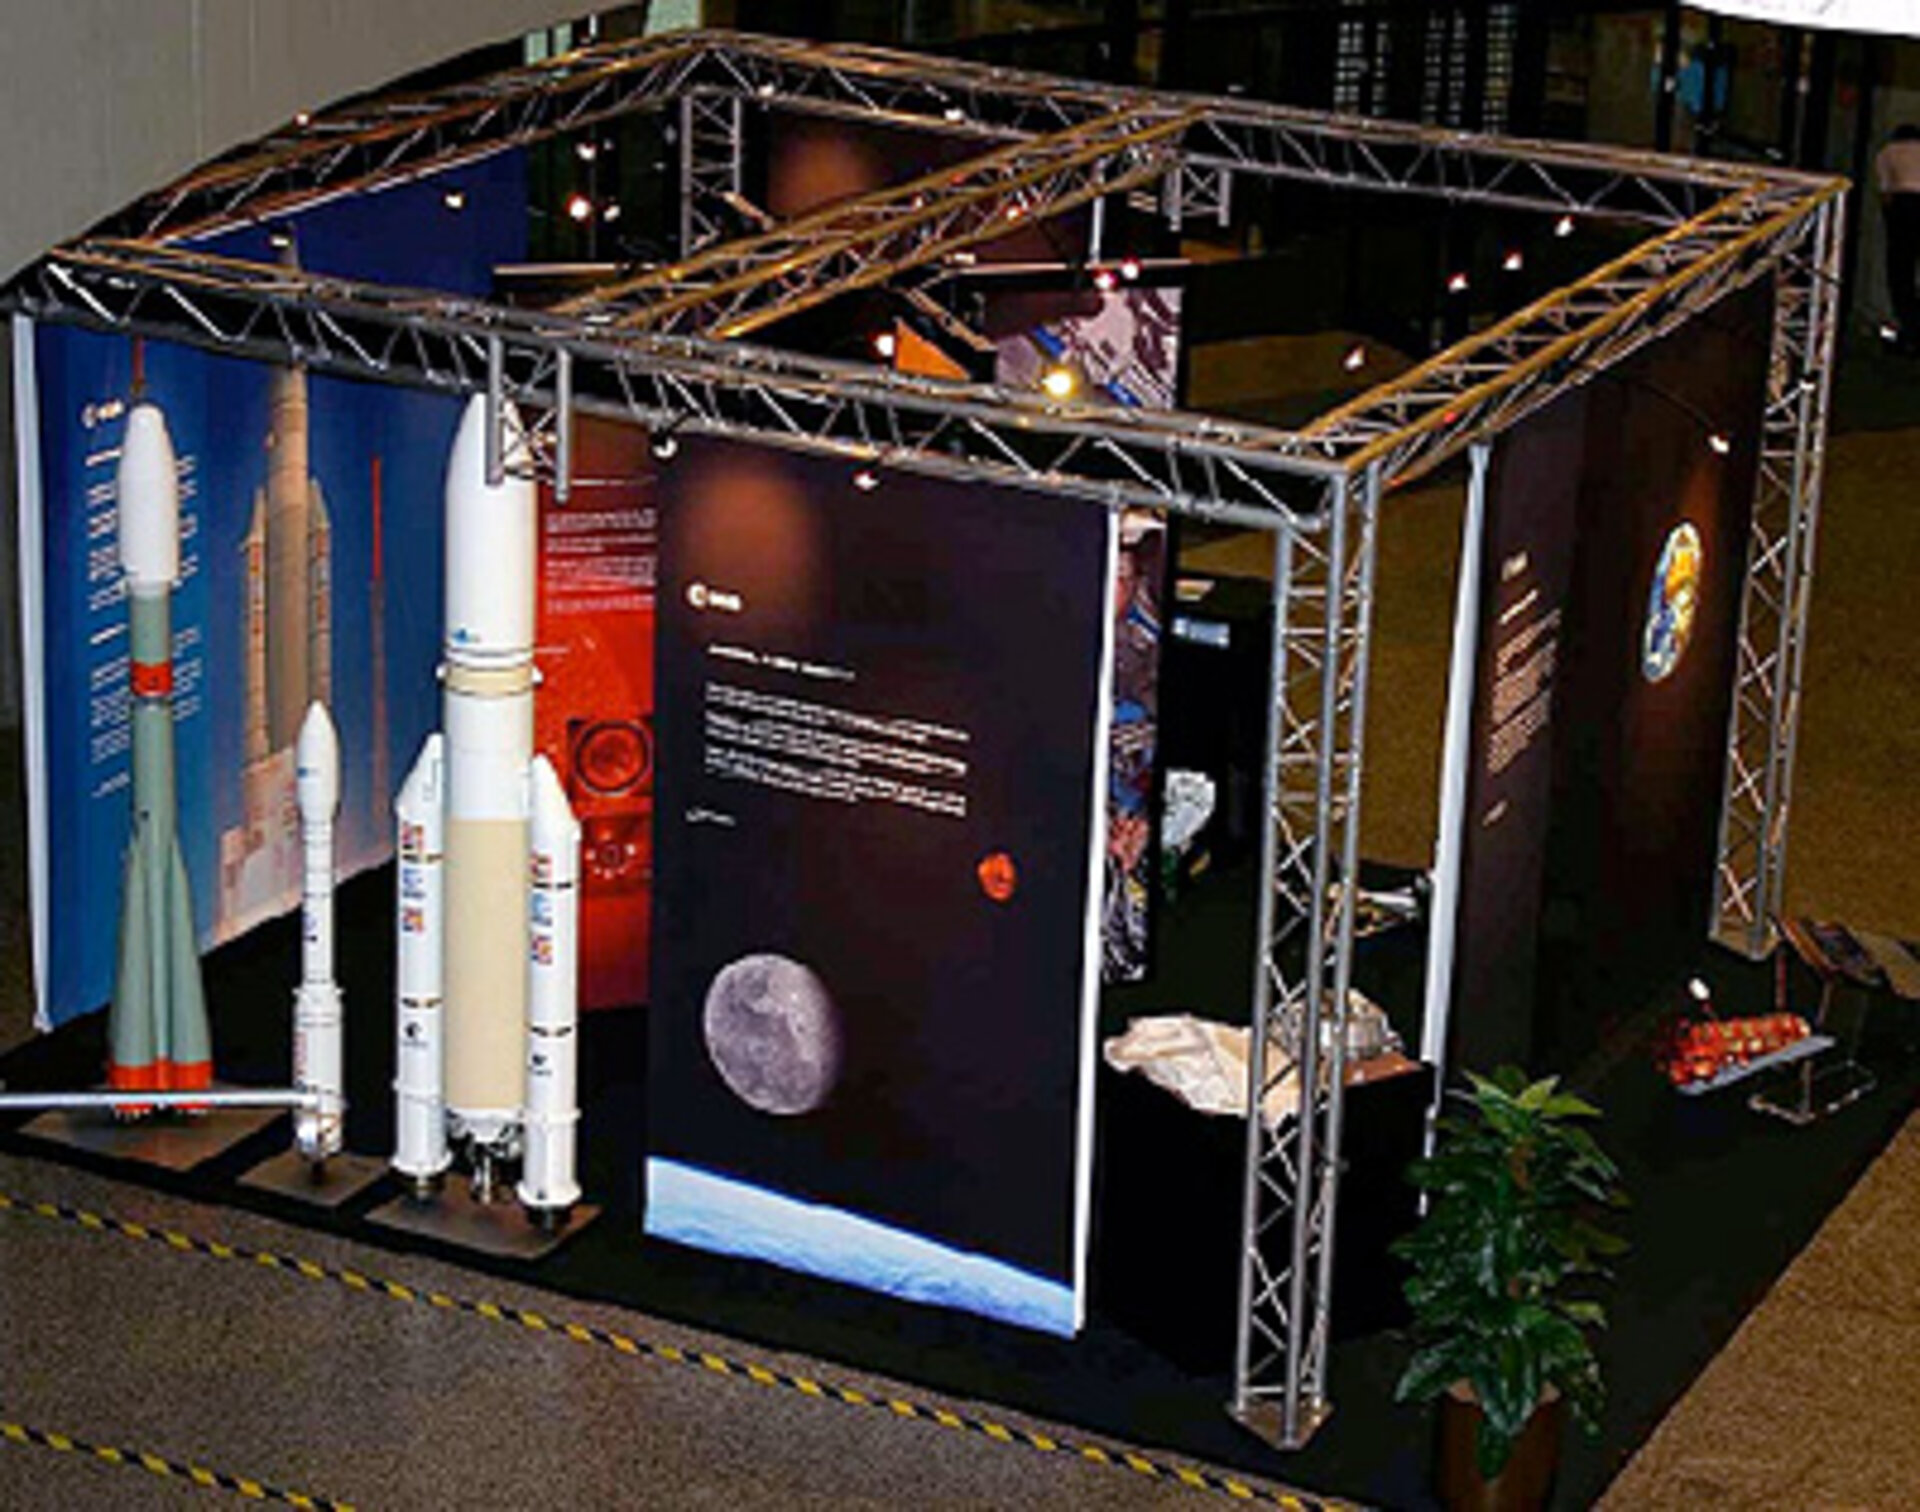 Opening ceremony of '50 Years of Space Achievement' exhibition